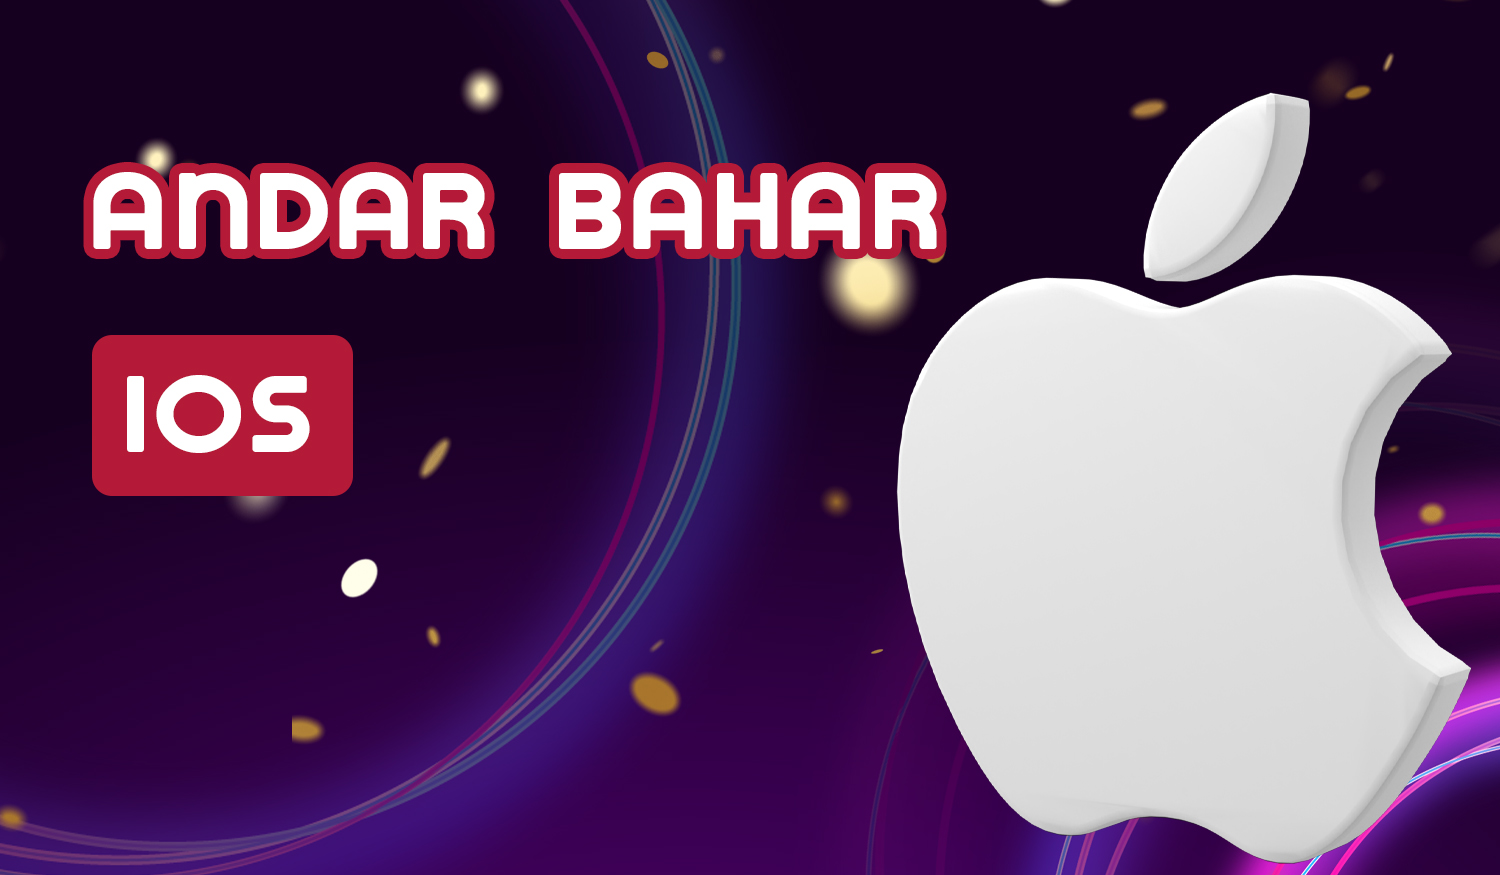 Download and install the app on iOS to play Andar Bahar online